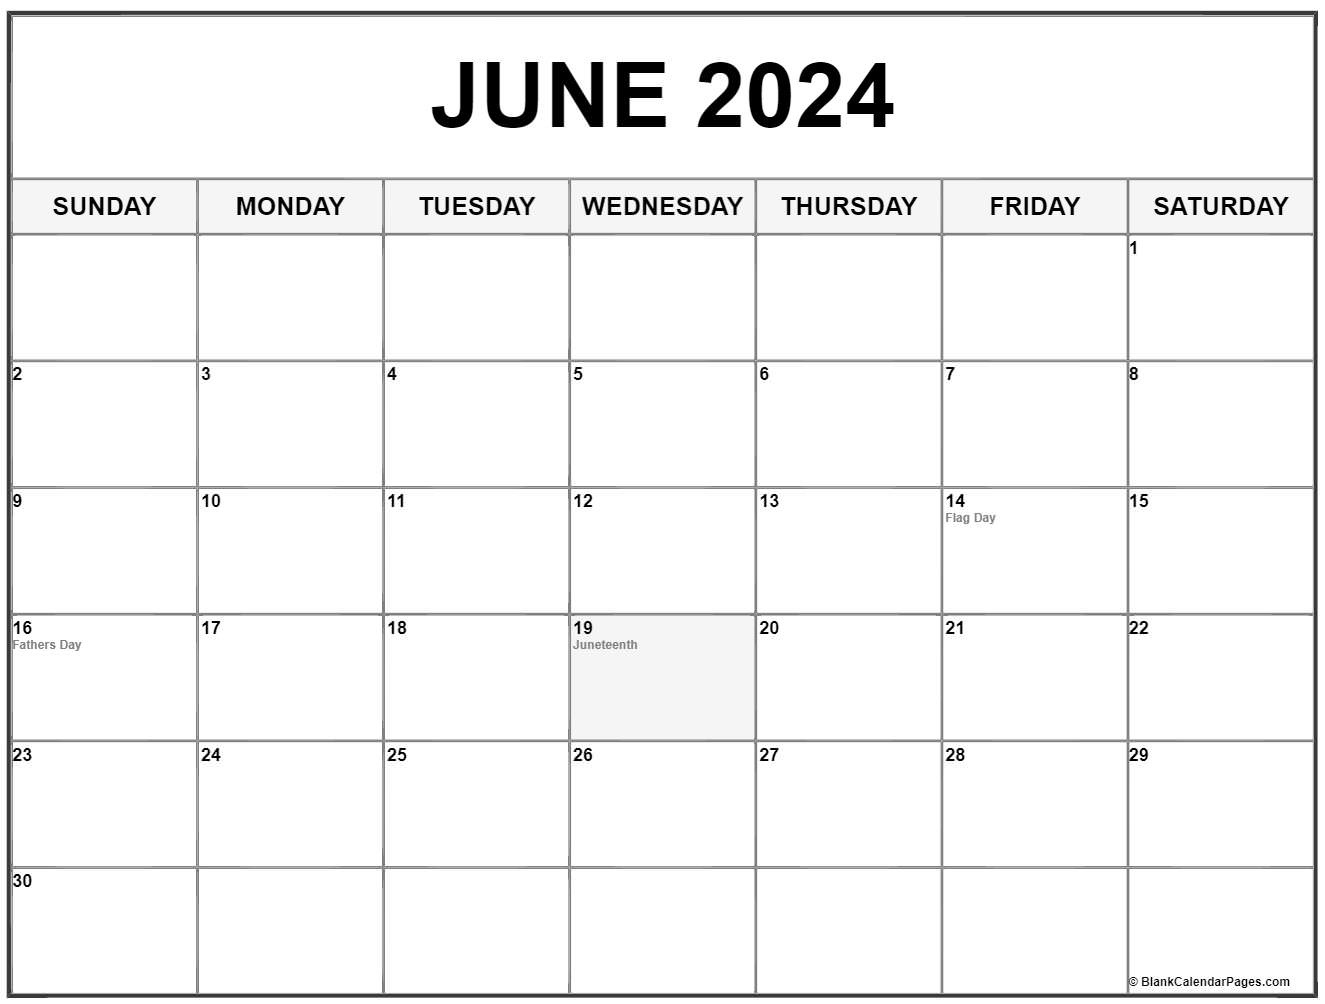 June 2024 With Holidays Calendar intended for May June 2024 Calendar With Holidays